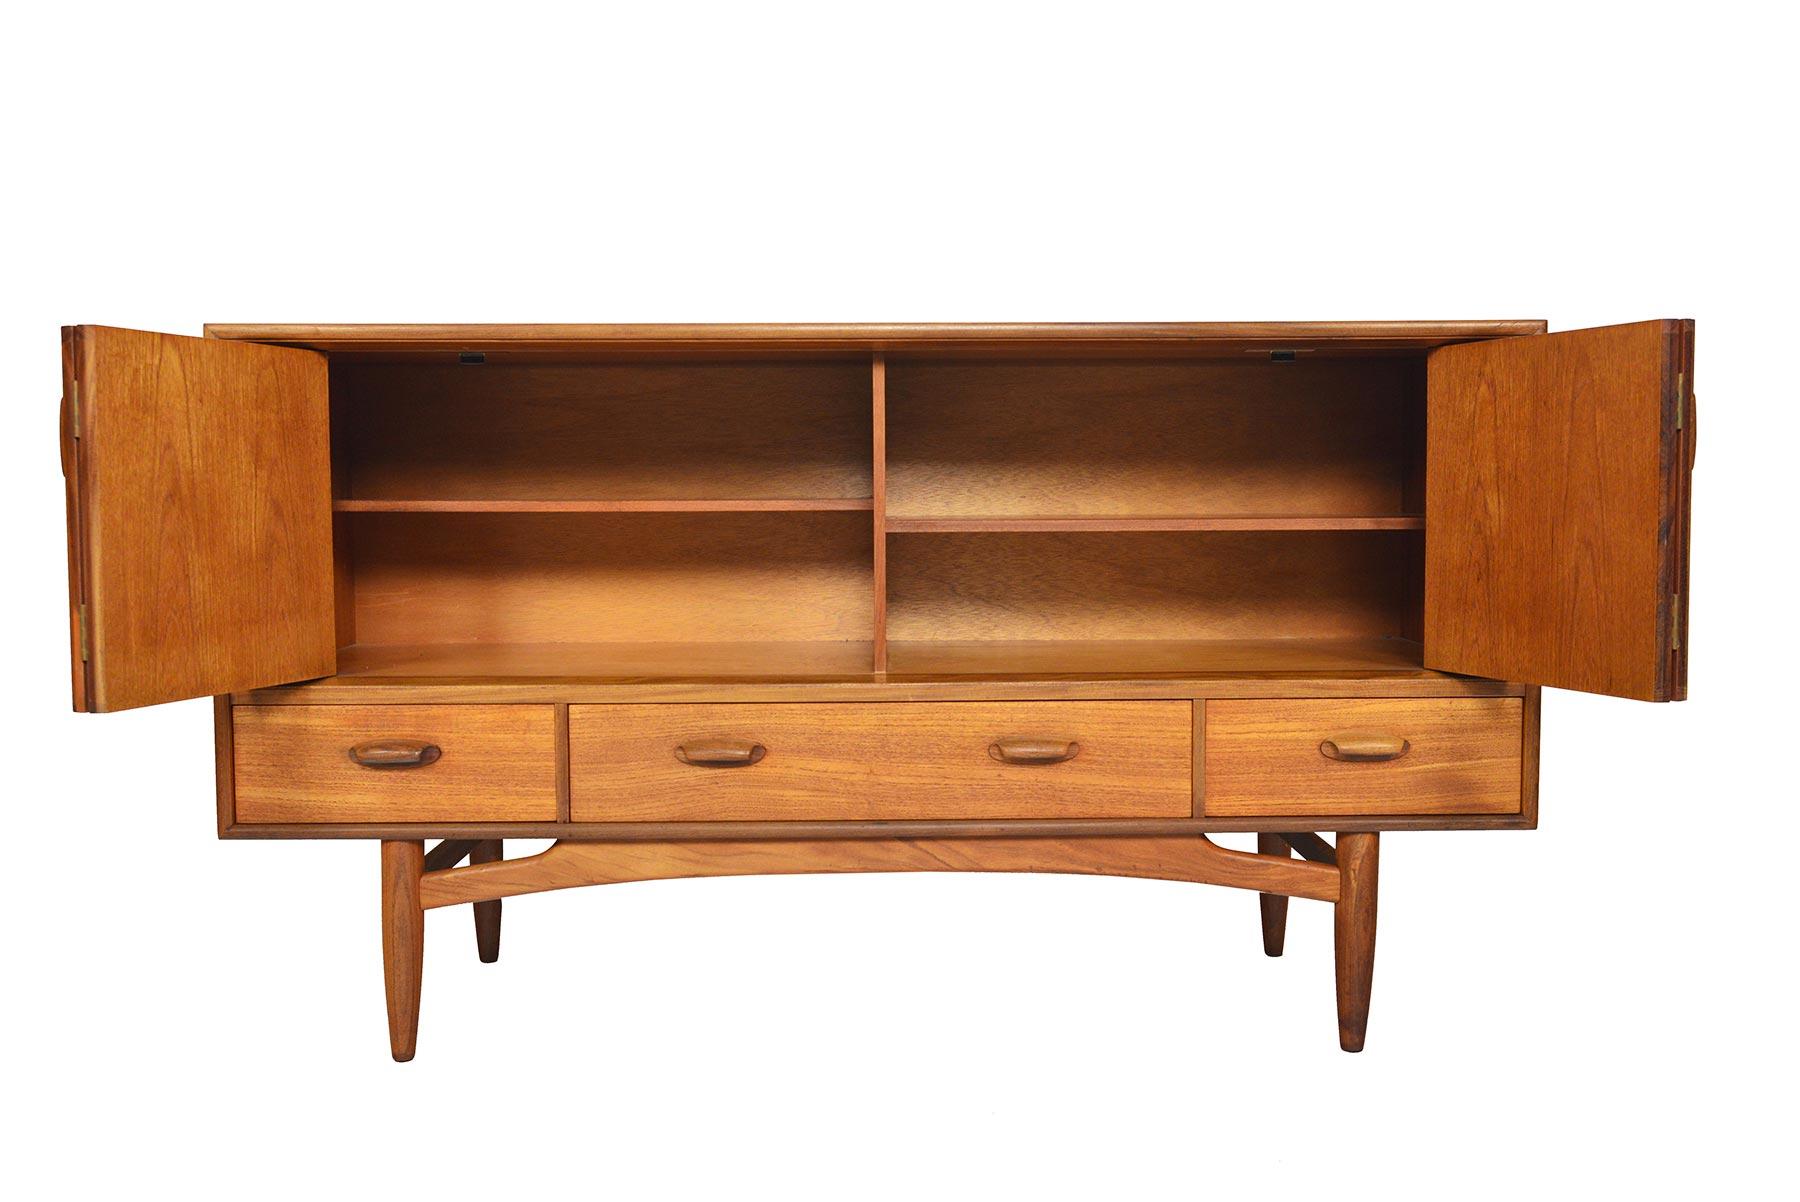 This gorgeous Mid-Century Modern teak credenza from G Plan’s Scandinavian Range was designed by Victor Wilkins in the 1960s. This exceptional piece features rolled solid teak handles and a massive amount of storage. The cabinet features two